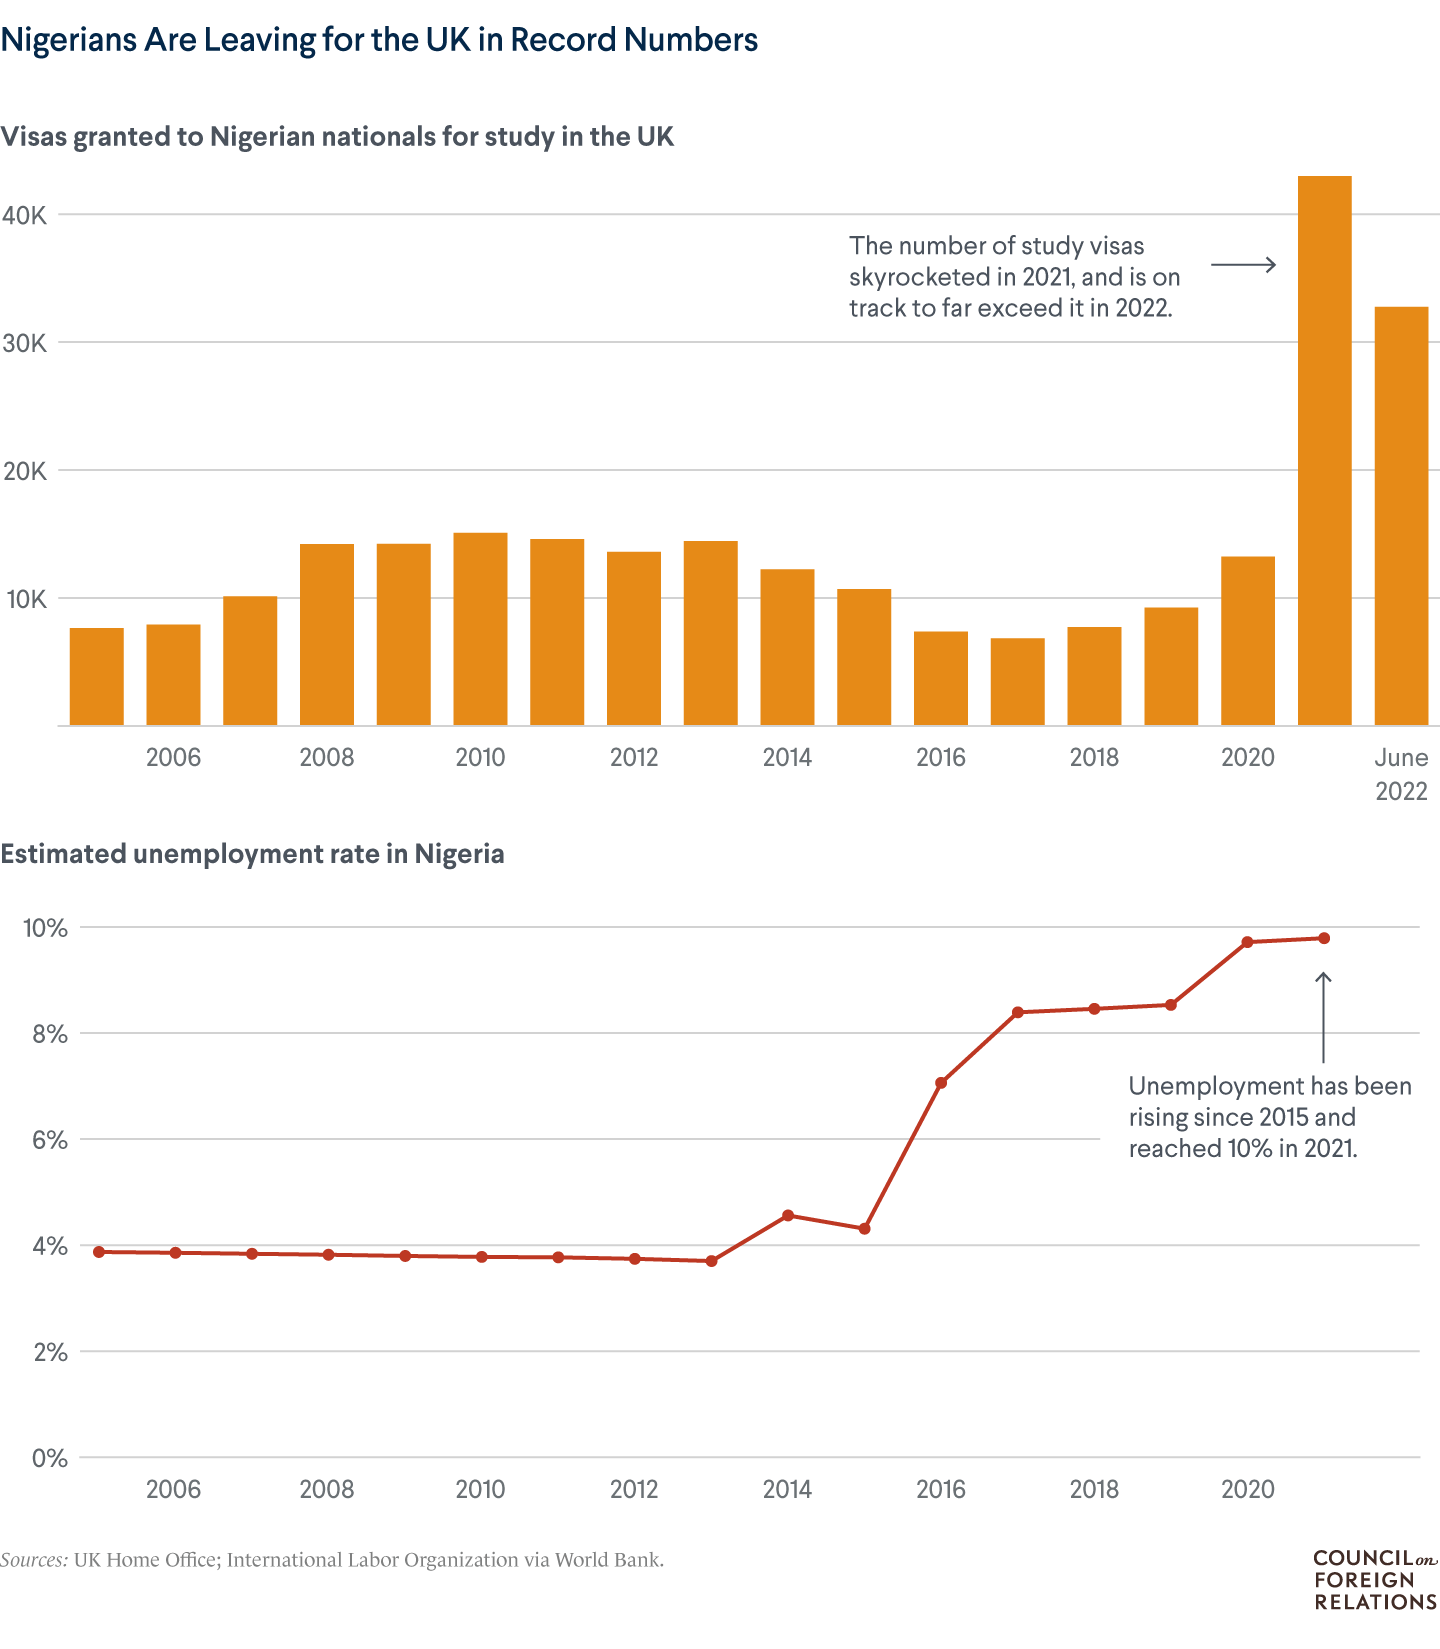 A chart showing a steep increase in the number of visas granted to Nigerians to study in the UK and a chart showing rising unemployment in Nigeria.